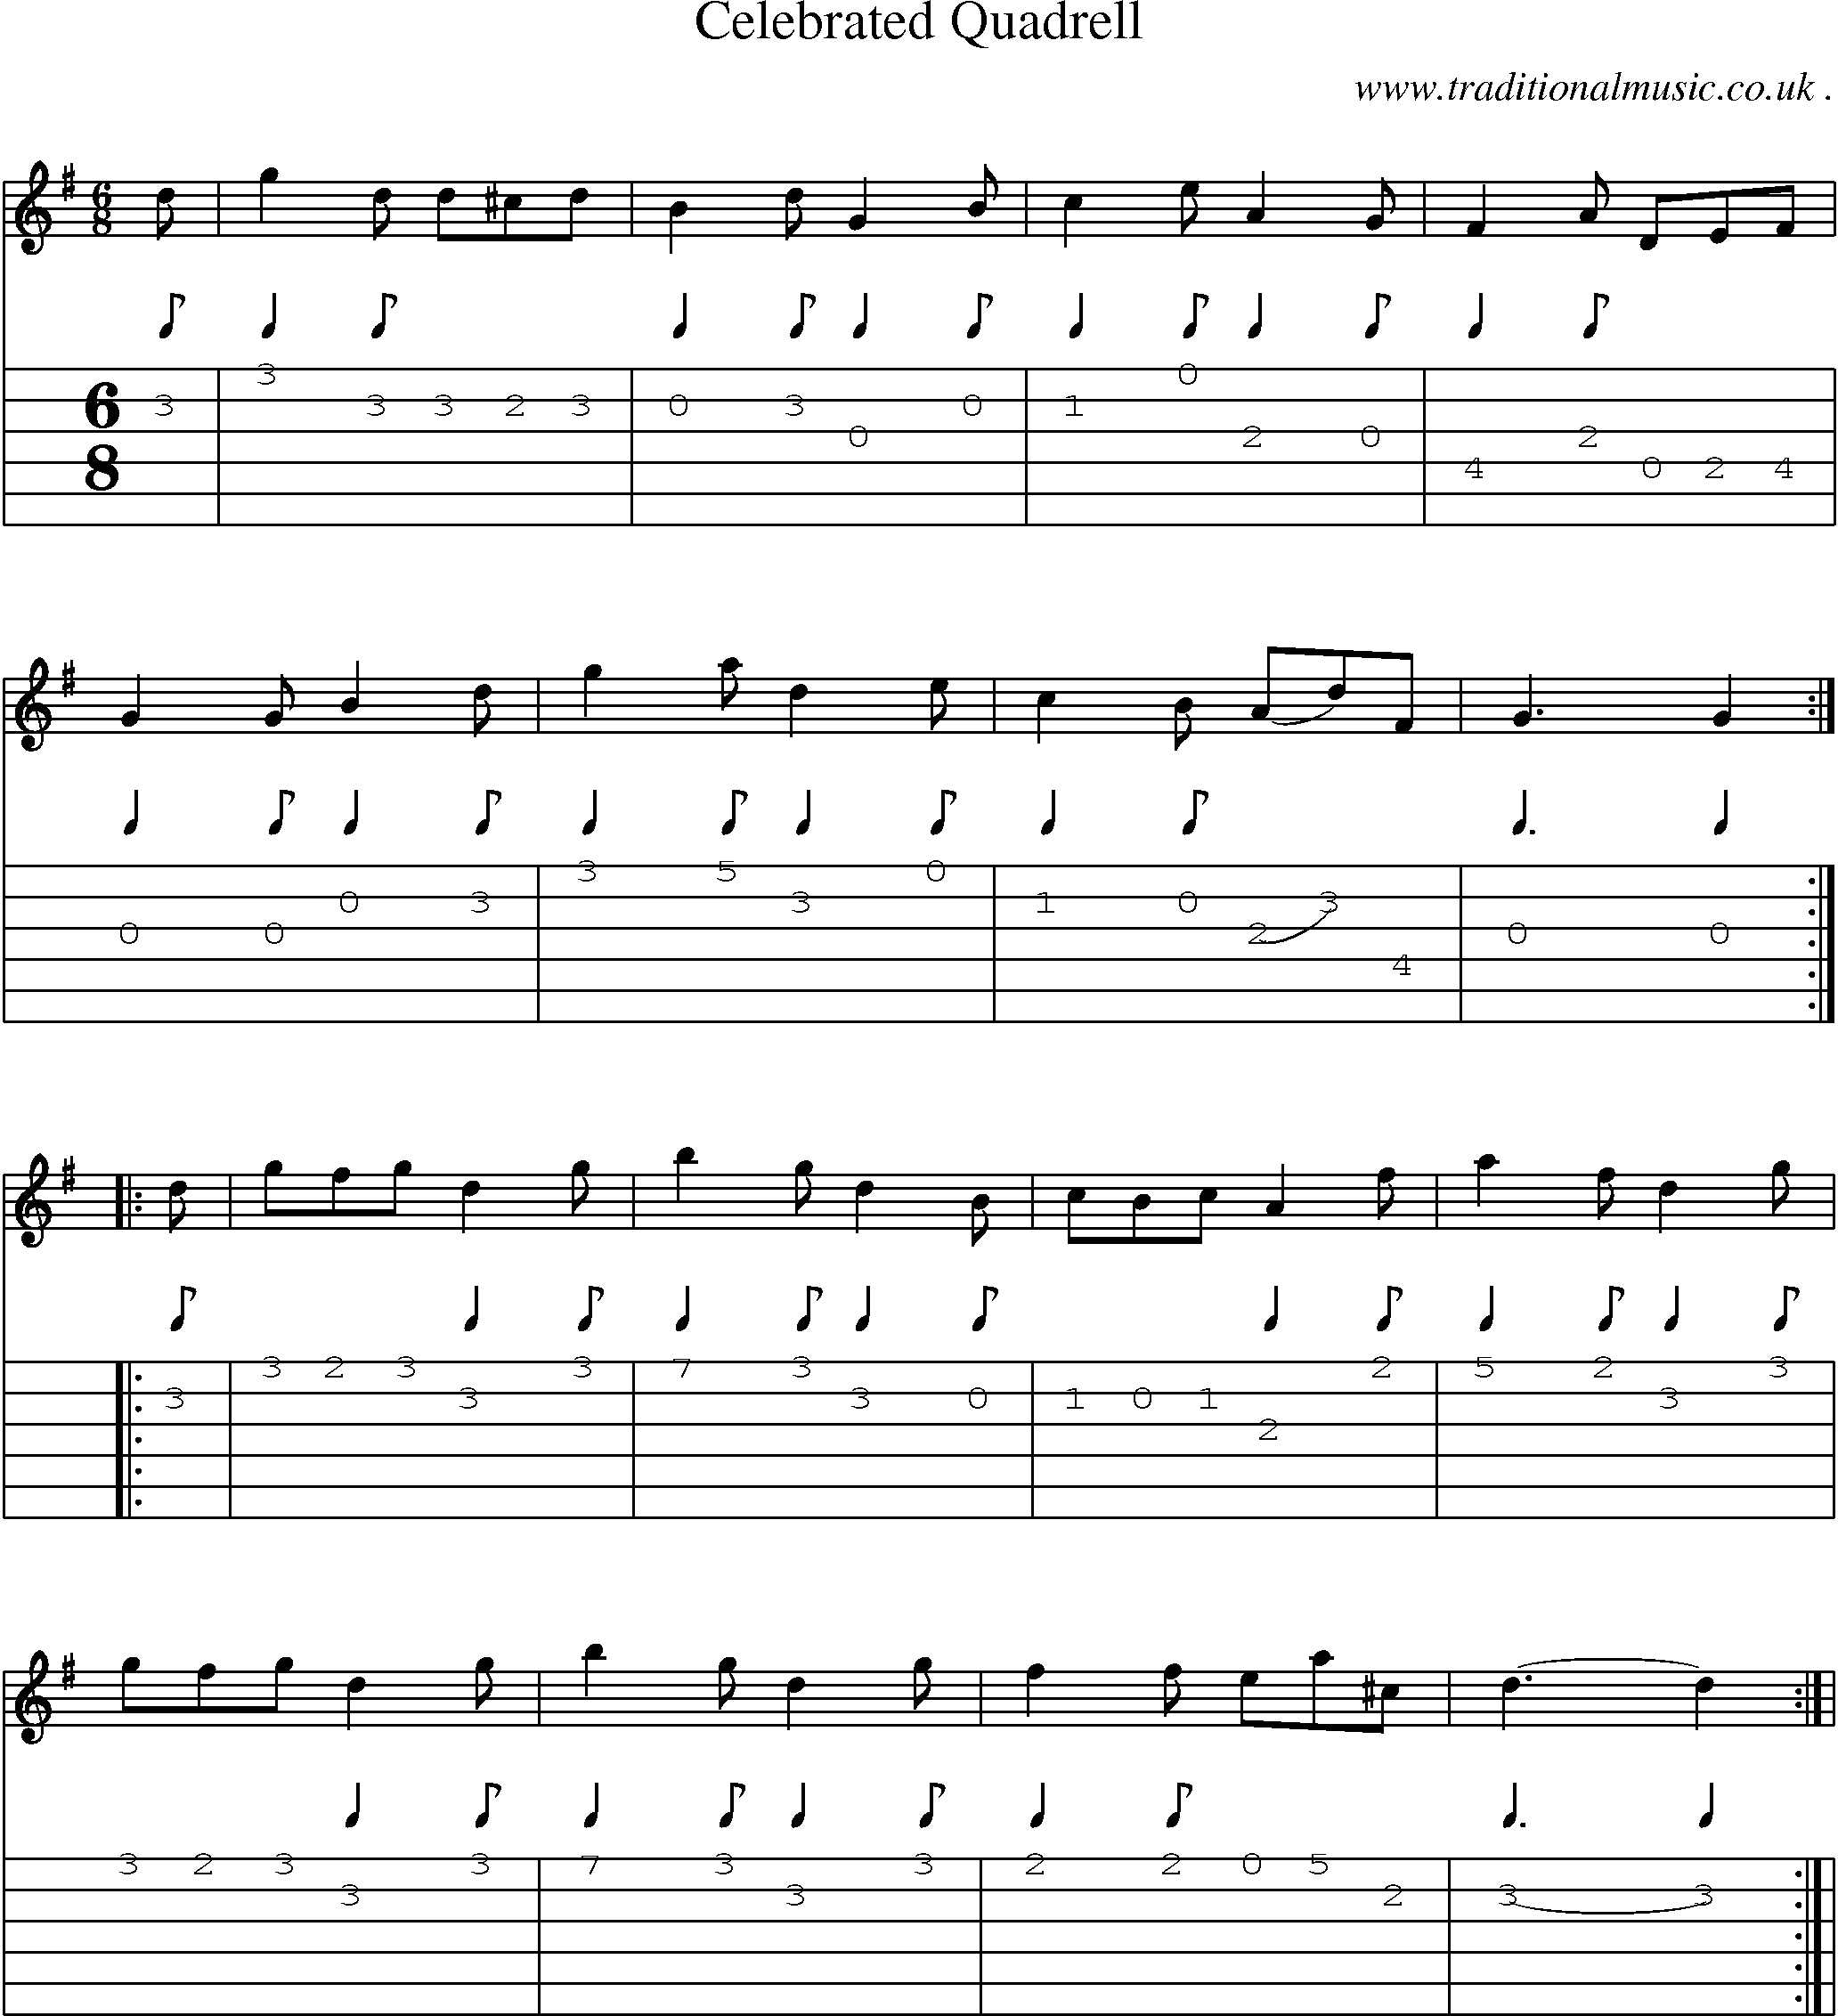 Sheet-Music and Guitar Tabs for Celebrated Quadrell